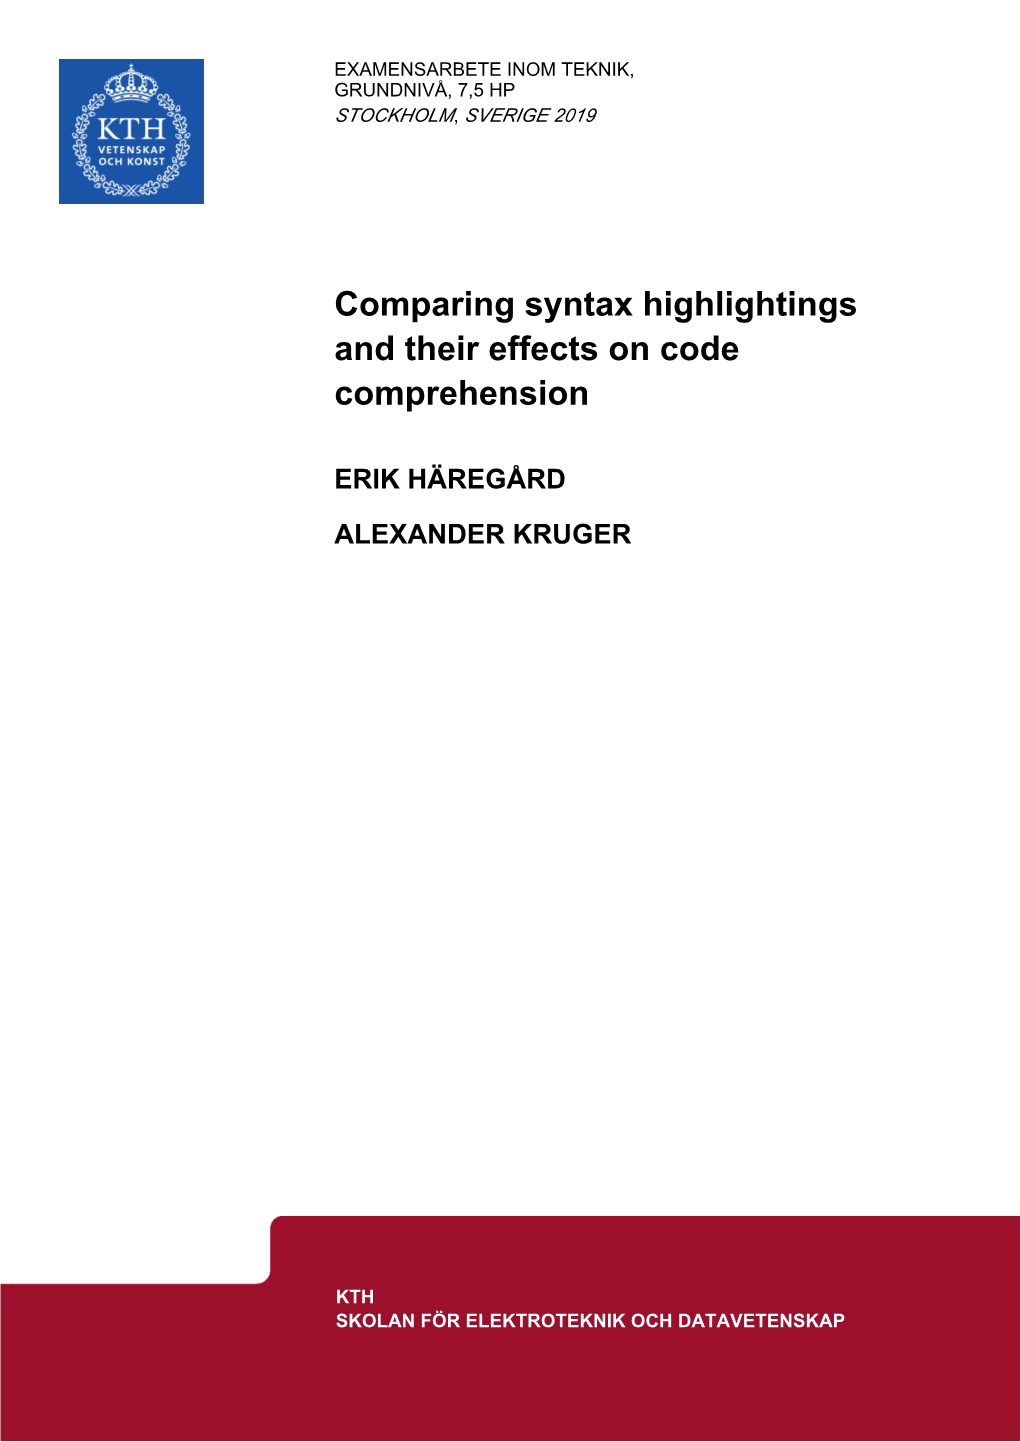 Comparing Syntax Highlightings and Their Effects on Code Comprehension